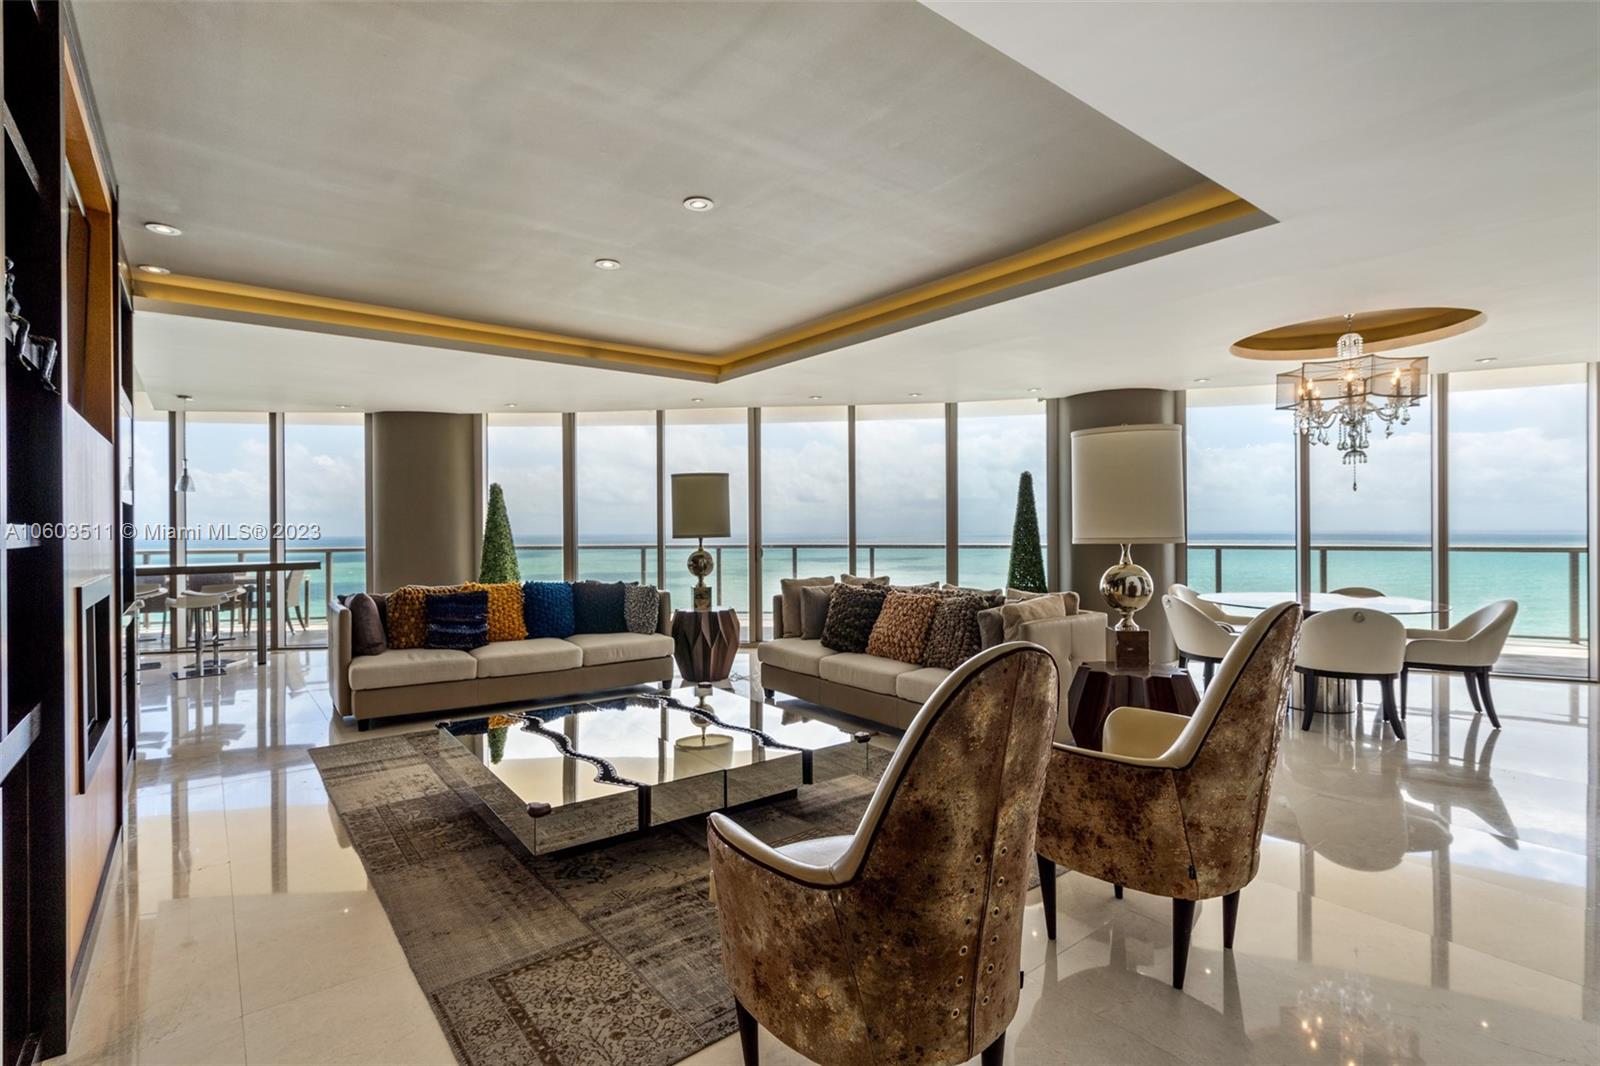 Exquisitely finished and furnished residence at the St. Regis Bal Harbour Center (Hotel Tower). 3 bedrooms, 3.5 baths. Breathtaking ocean view, enjoy 5 star resort amenities including 14000 SF Remede Spa.